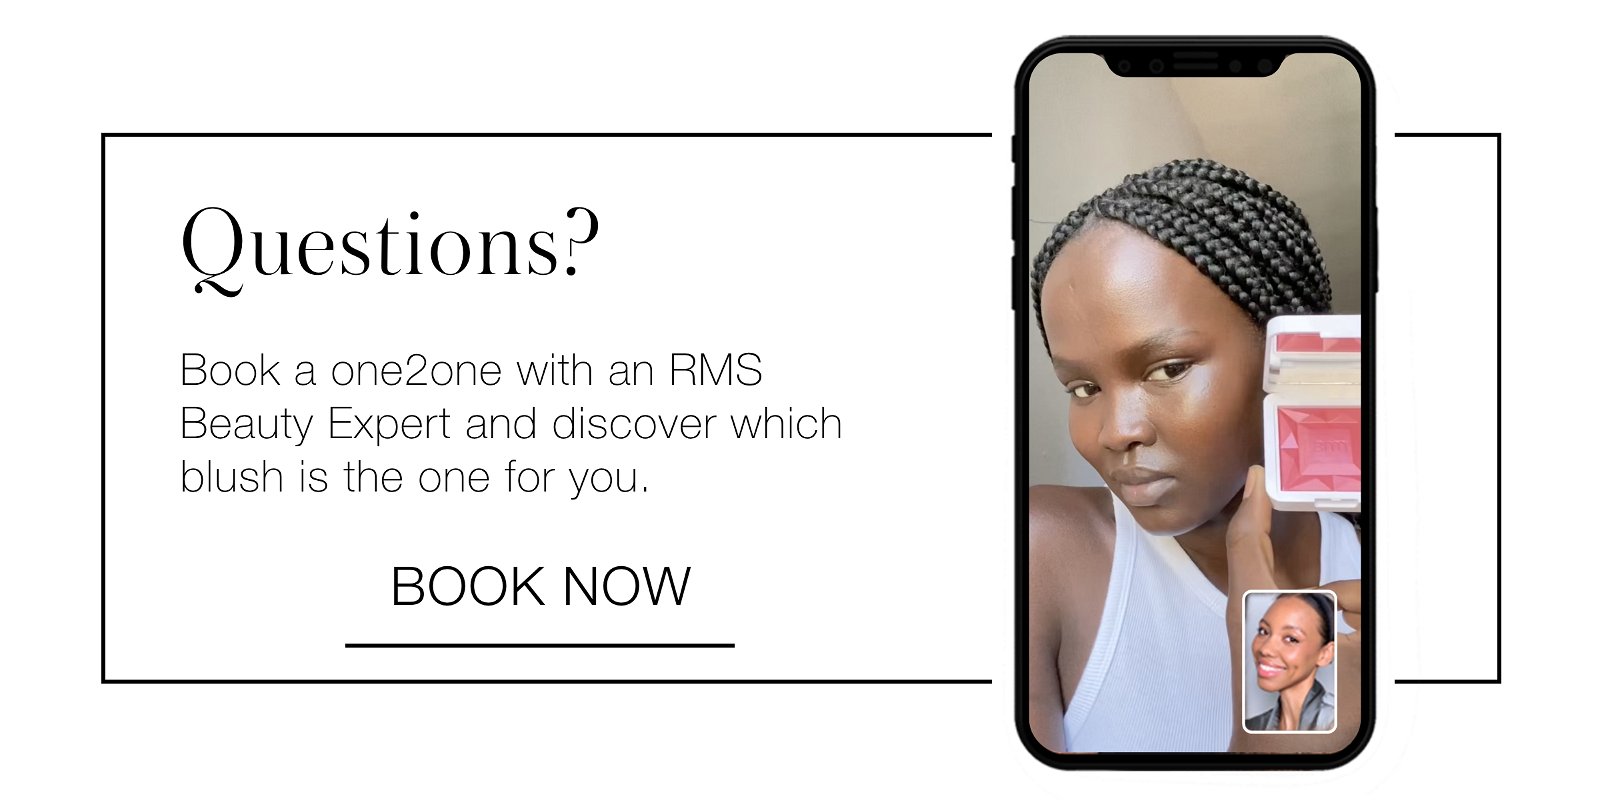 Question? Book a one2one with an RMS Beauty Expert and discover which blush is the one for you. Book now.